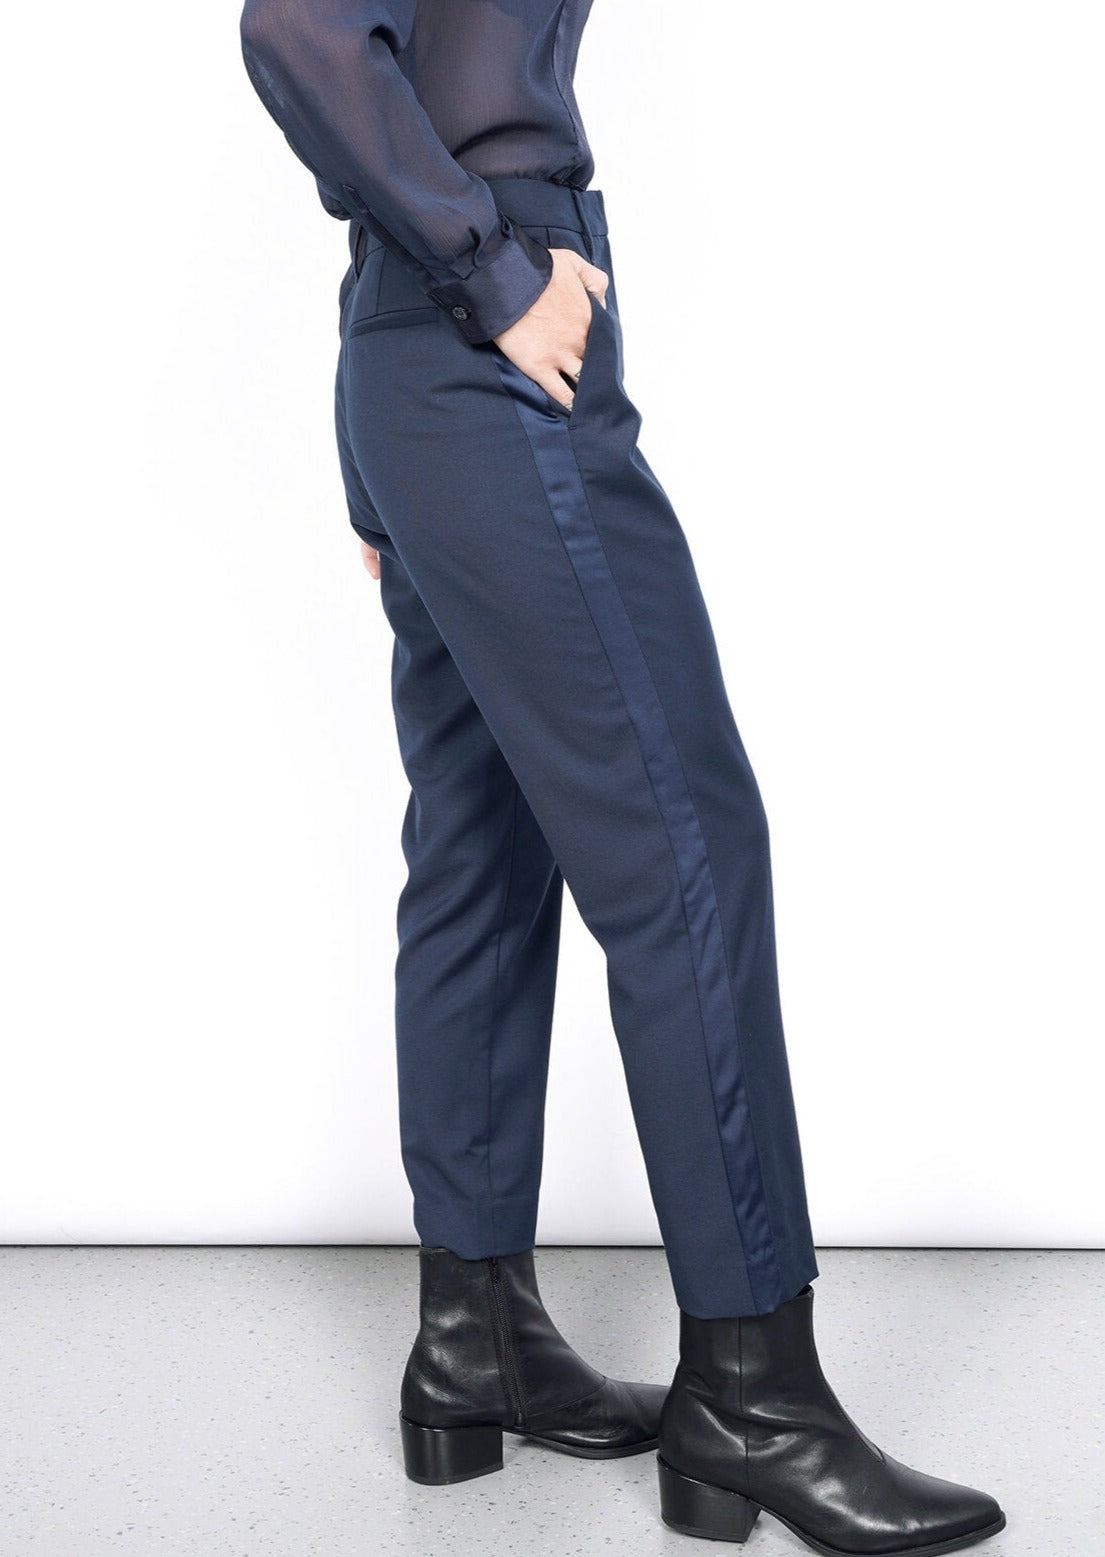 The Empower Colorblock Slim Crop Pant in Navy